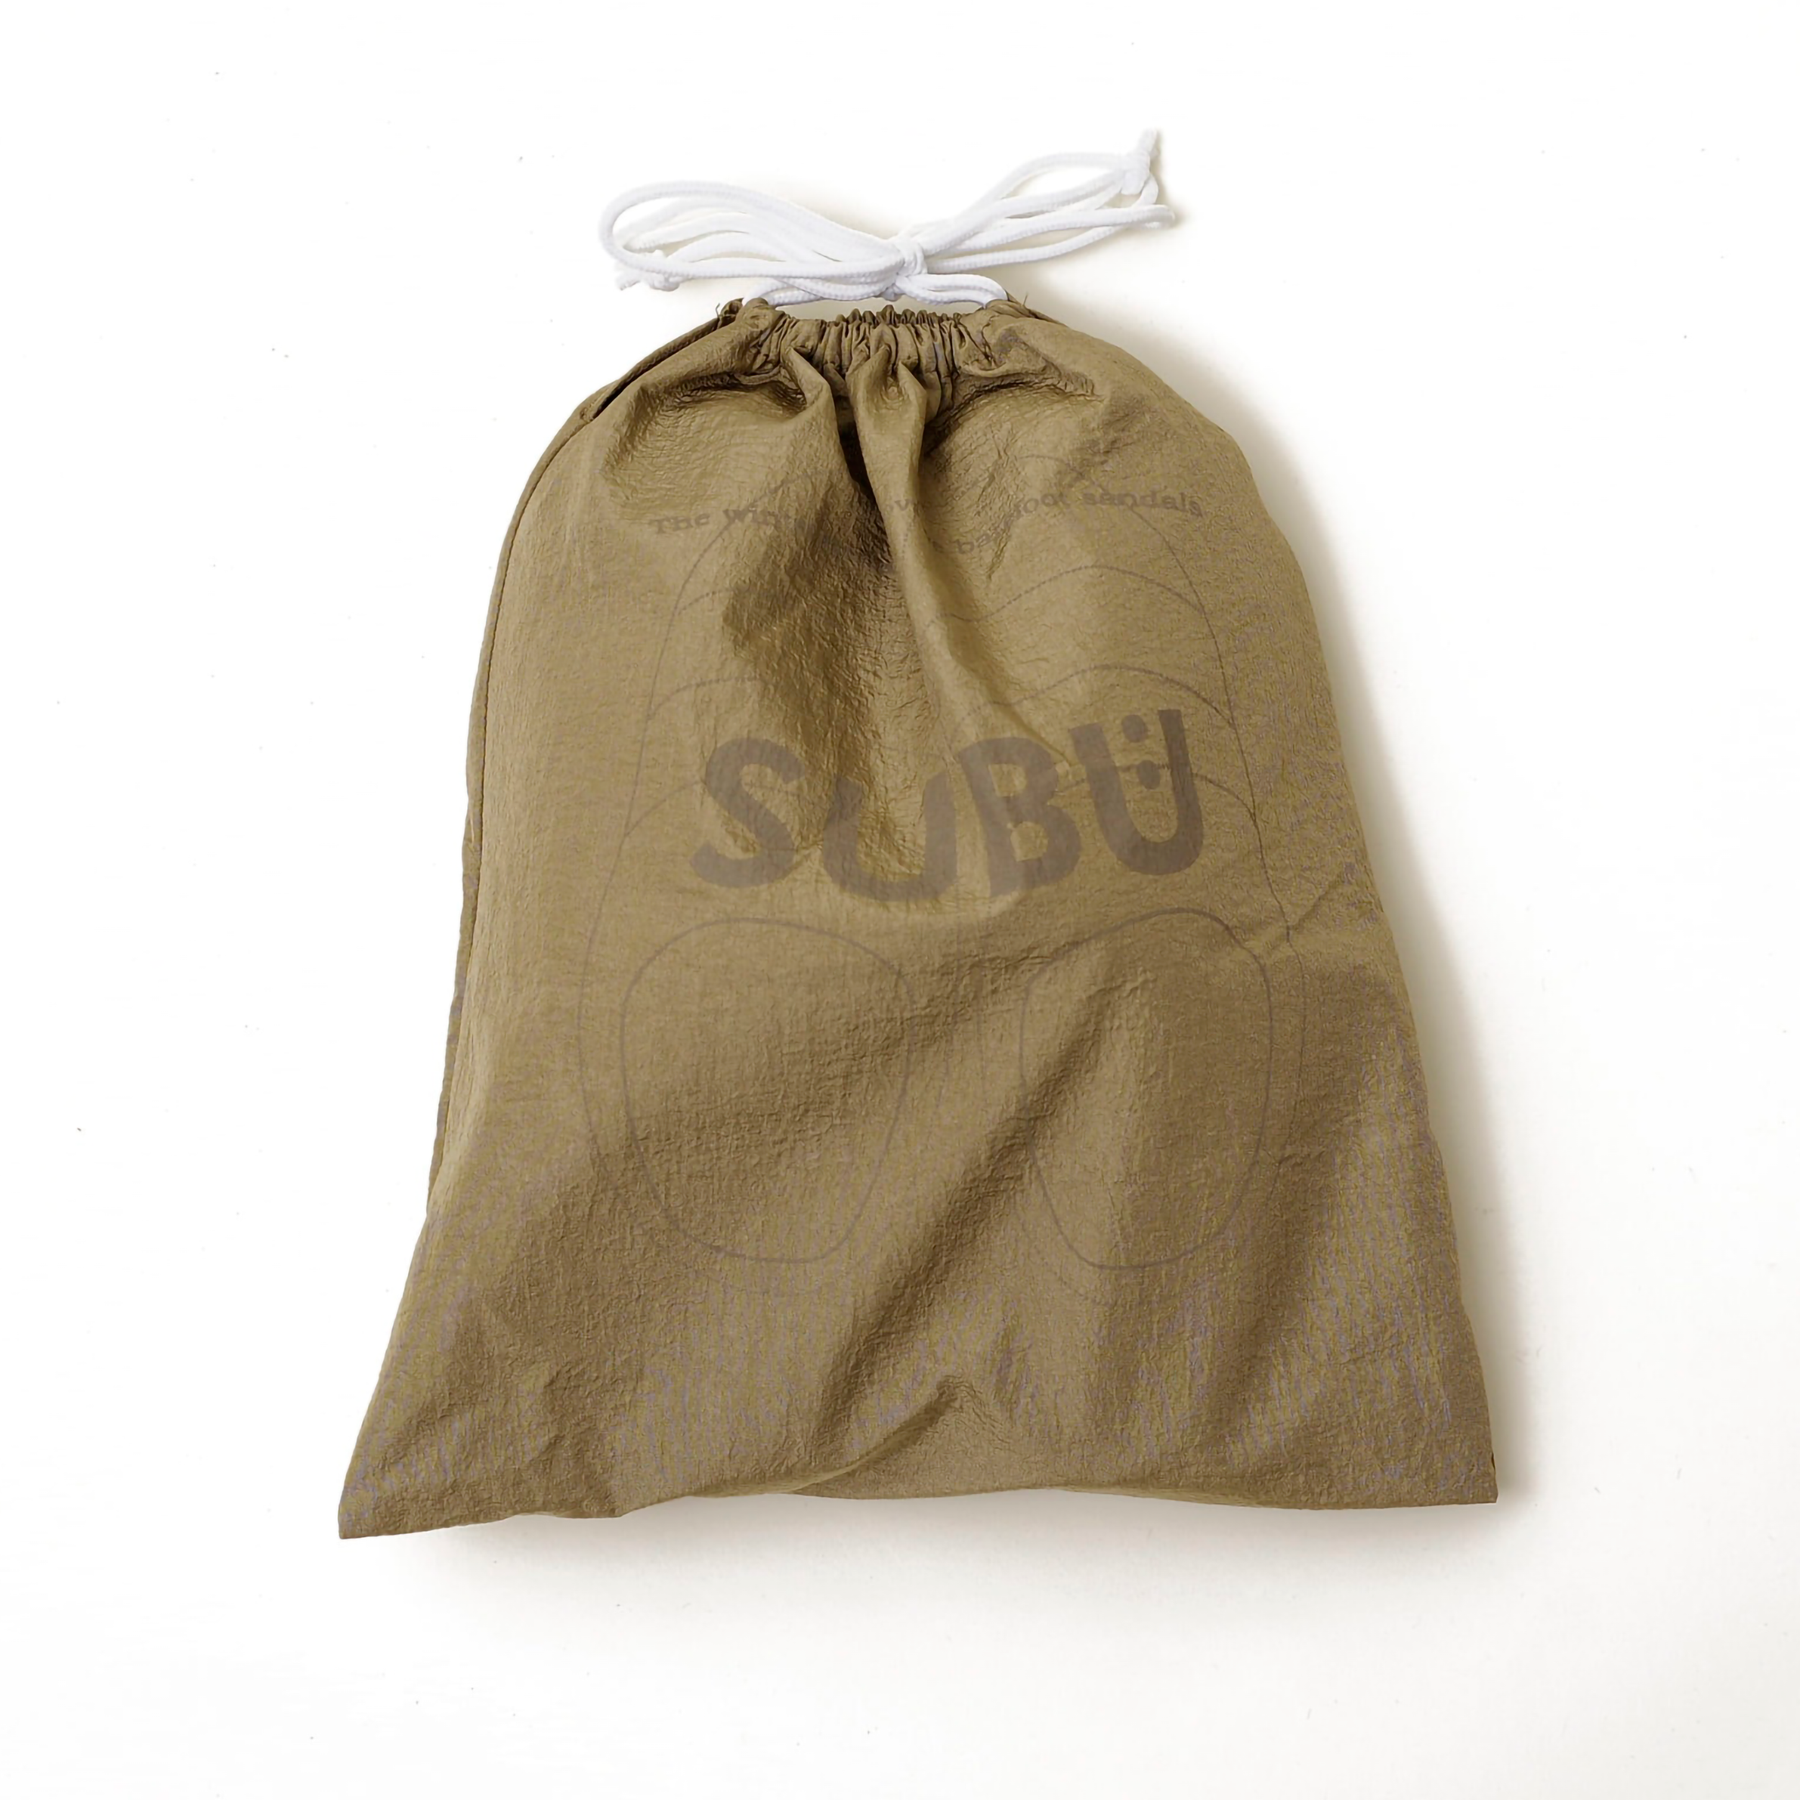 SUBU, Fall & Winter Slippers Beige, Size, 4, Slippers,